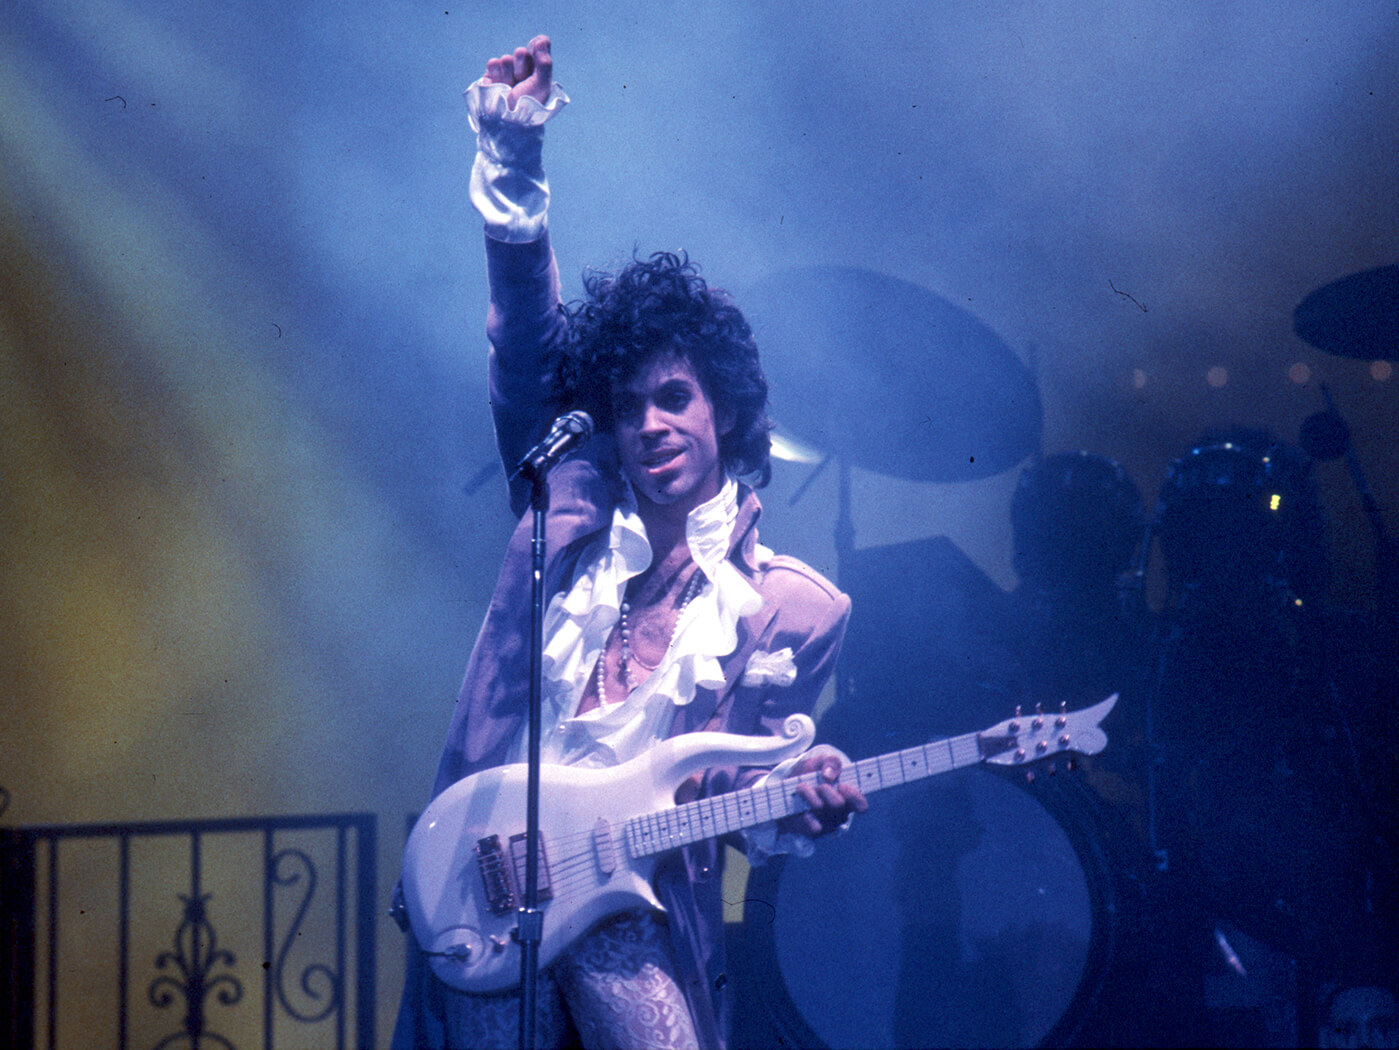 Prince with Cloud Guitar Getty Images